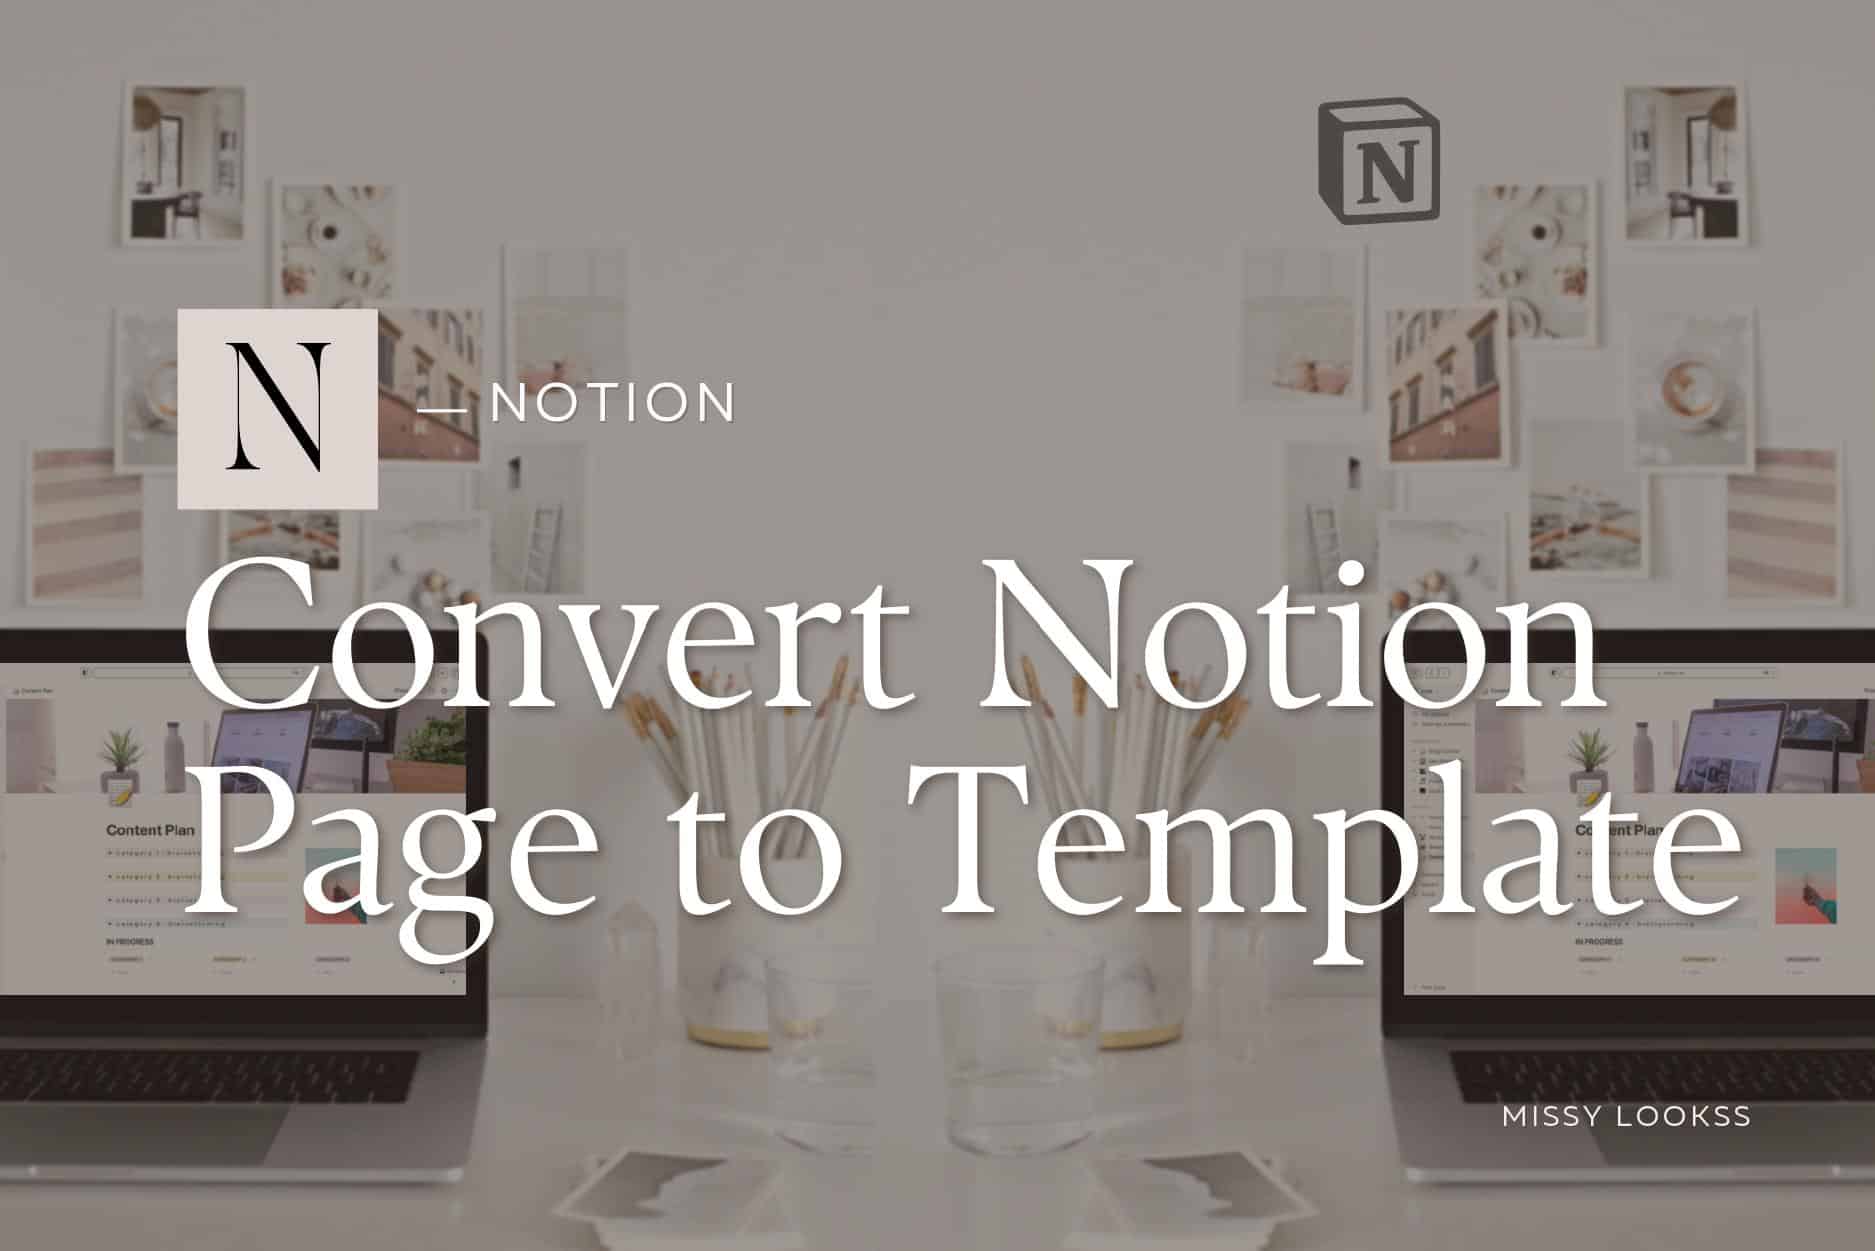 Convert existing Notion page to template